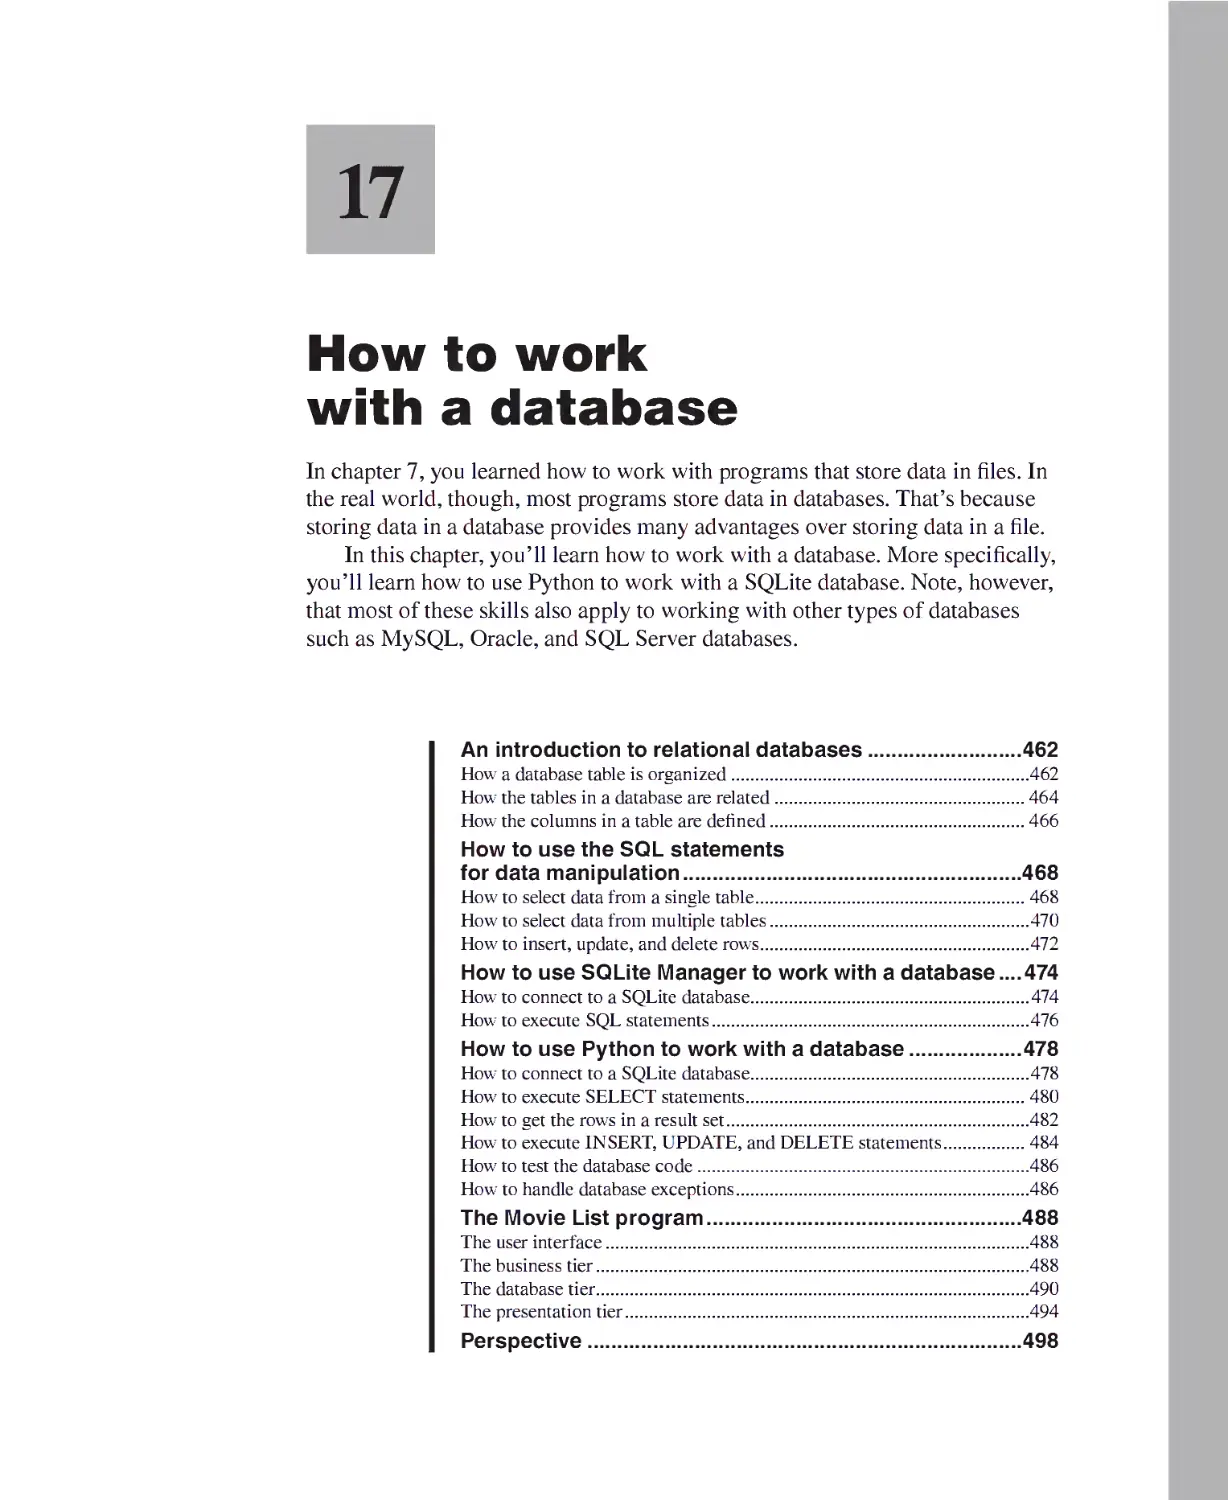 Chapter 17 - How to Work with a Database